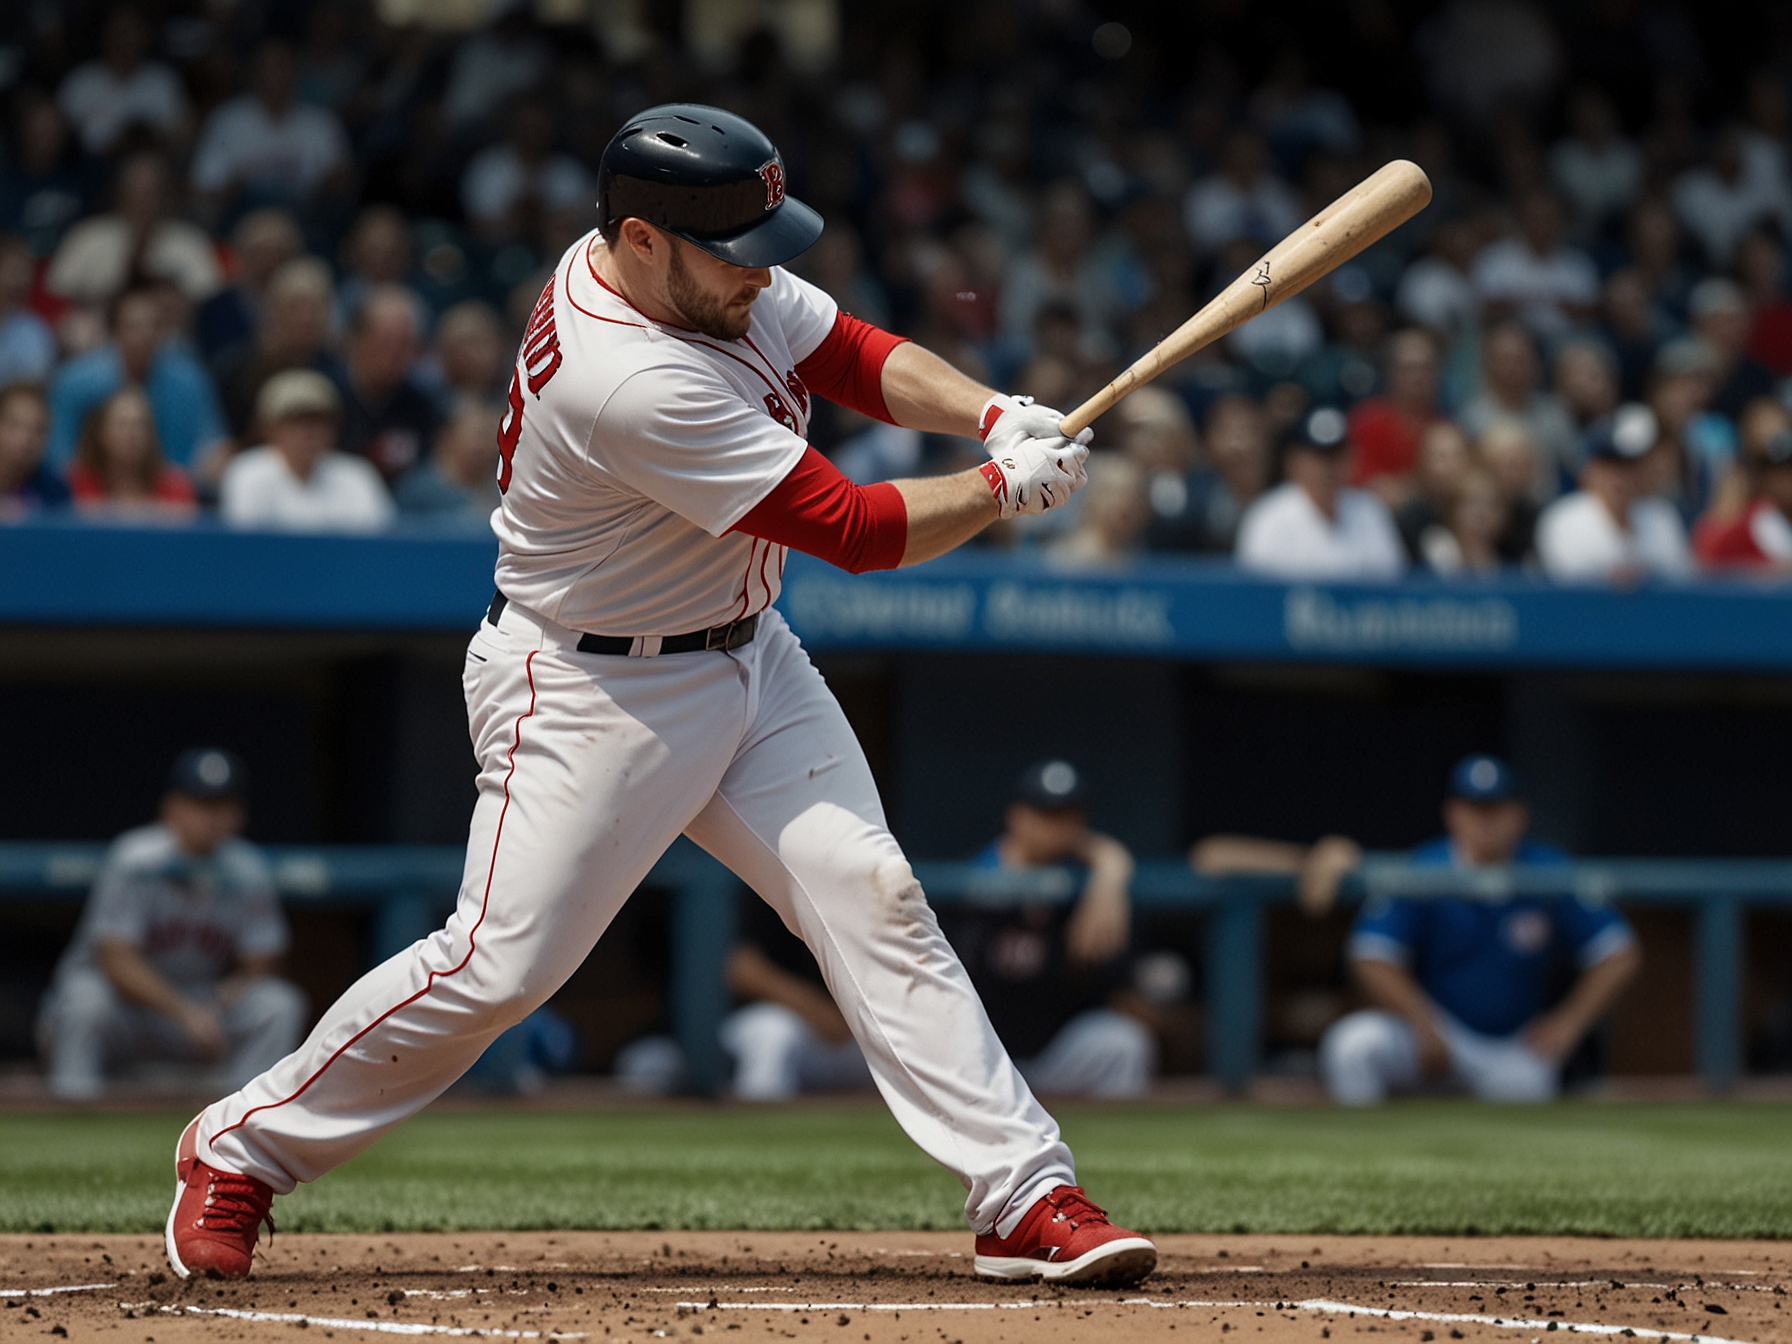 Tyler O'Neill of the Boston Red Sox hitting one of his two solo home runs against the Toronto Blue Jays at Rogers Centre, showcasing his powerful batting skills.